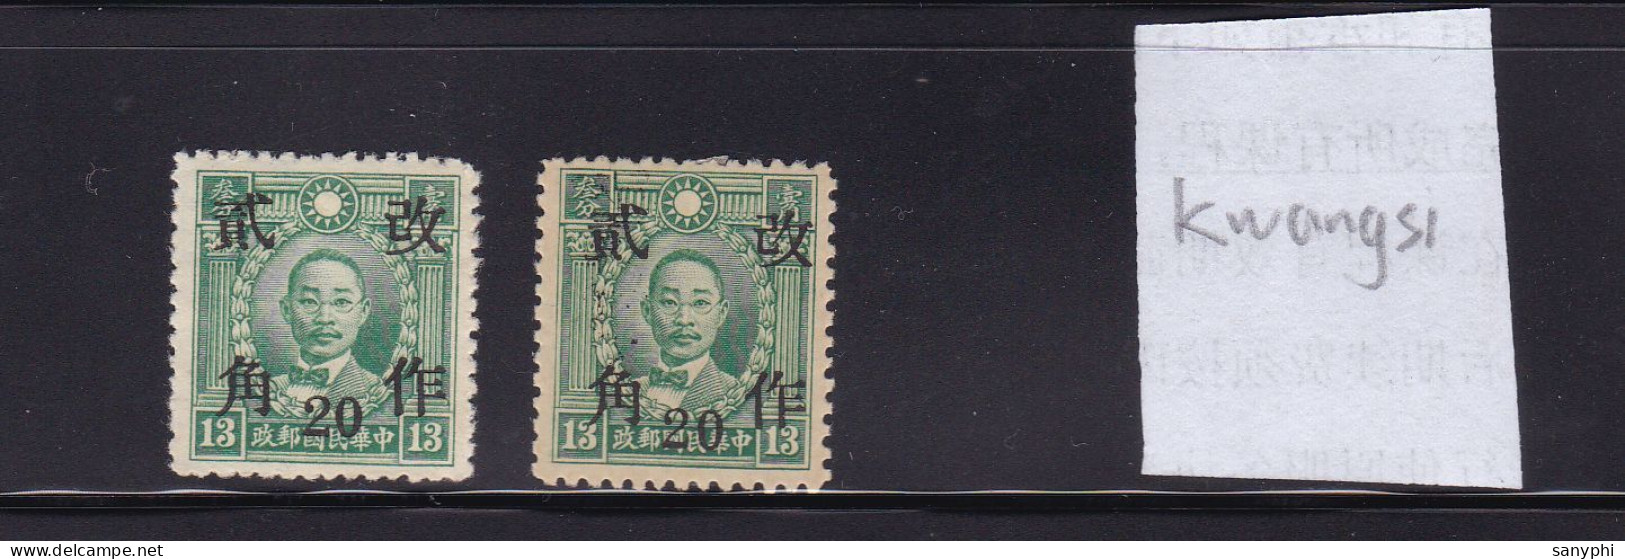 China Republic Martyt Provincial Ovpts 2 Unused Stamps-kwangsi - 1912-1949 Republic